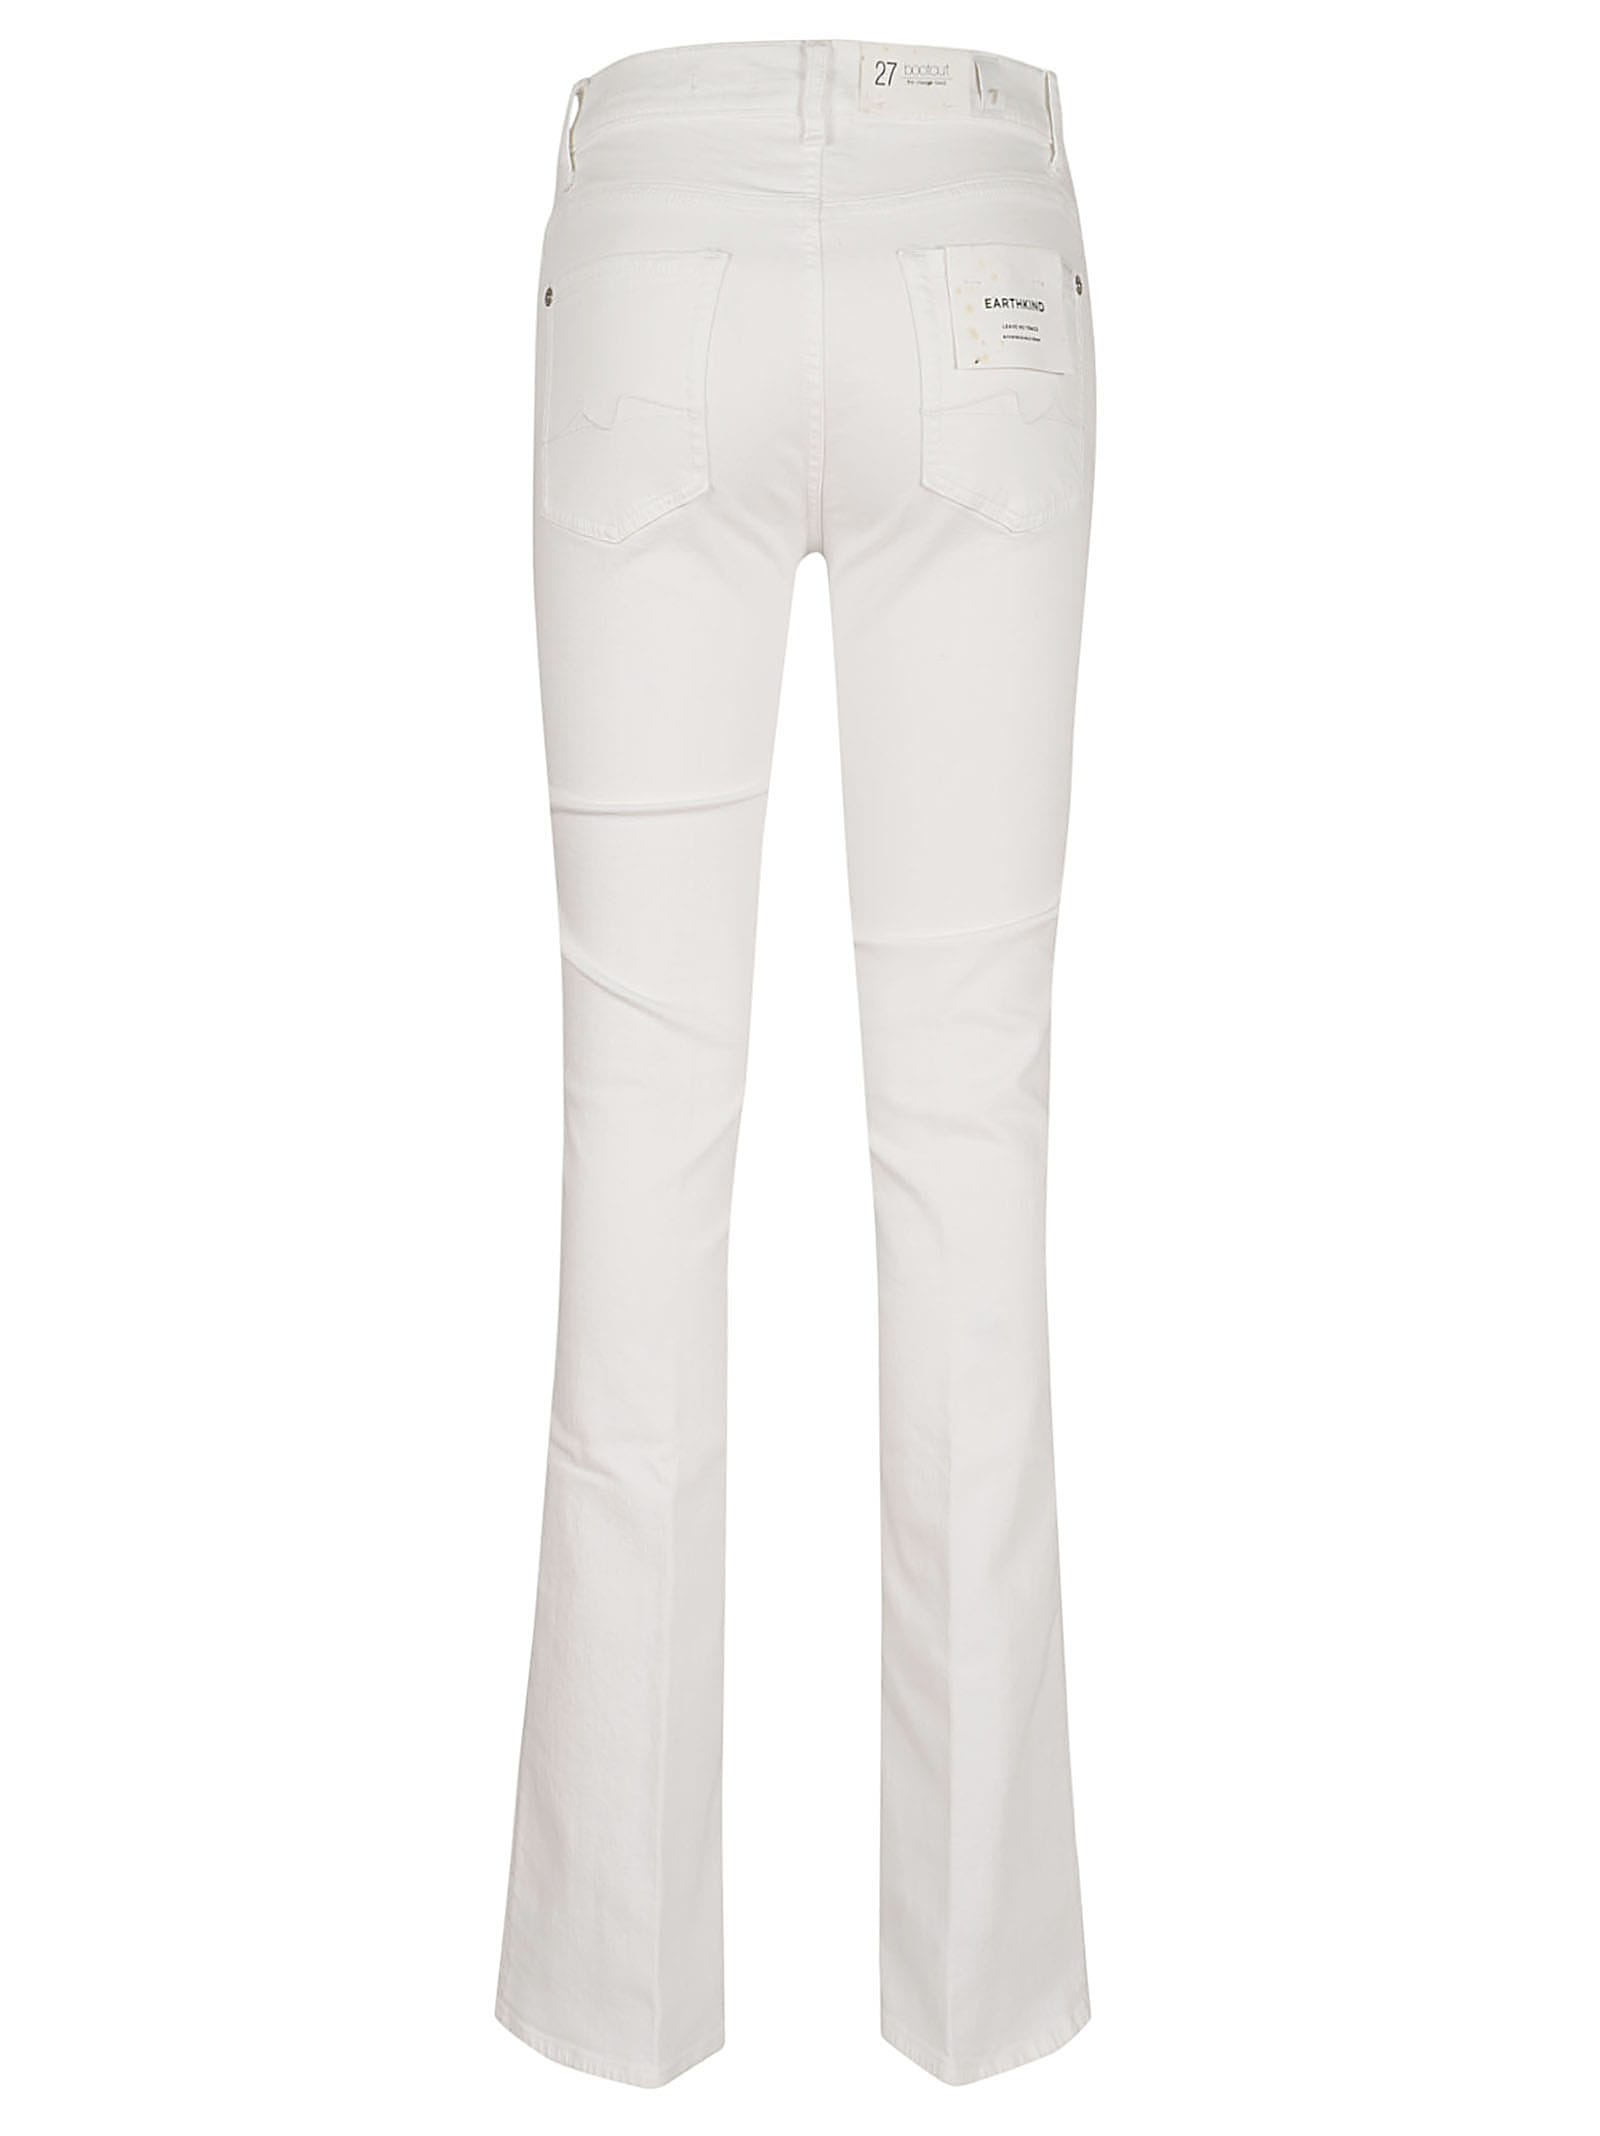 Shop 7 For All Mankind Bootcut Pure White